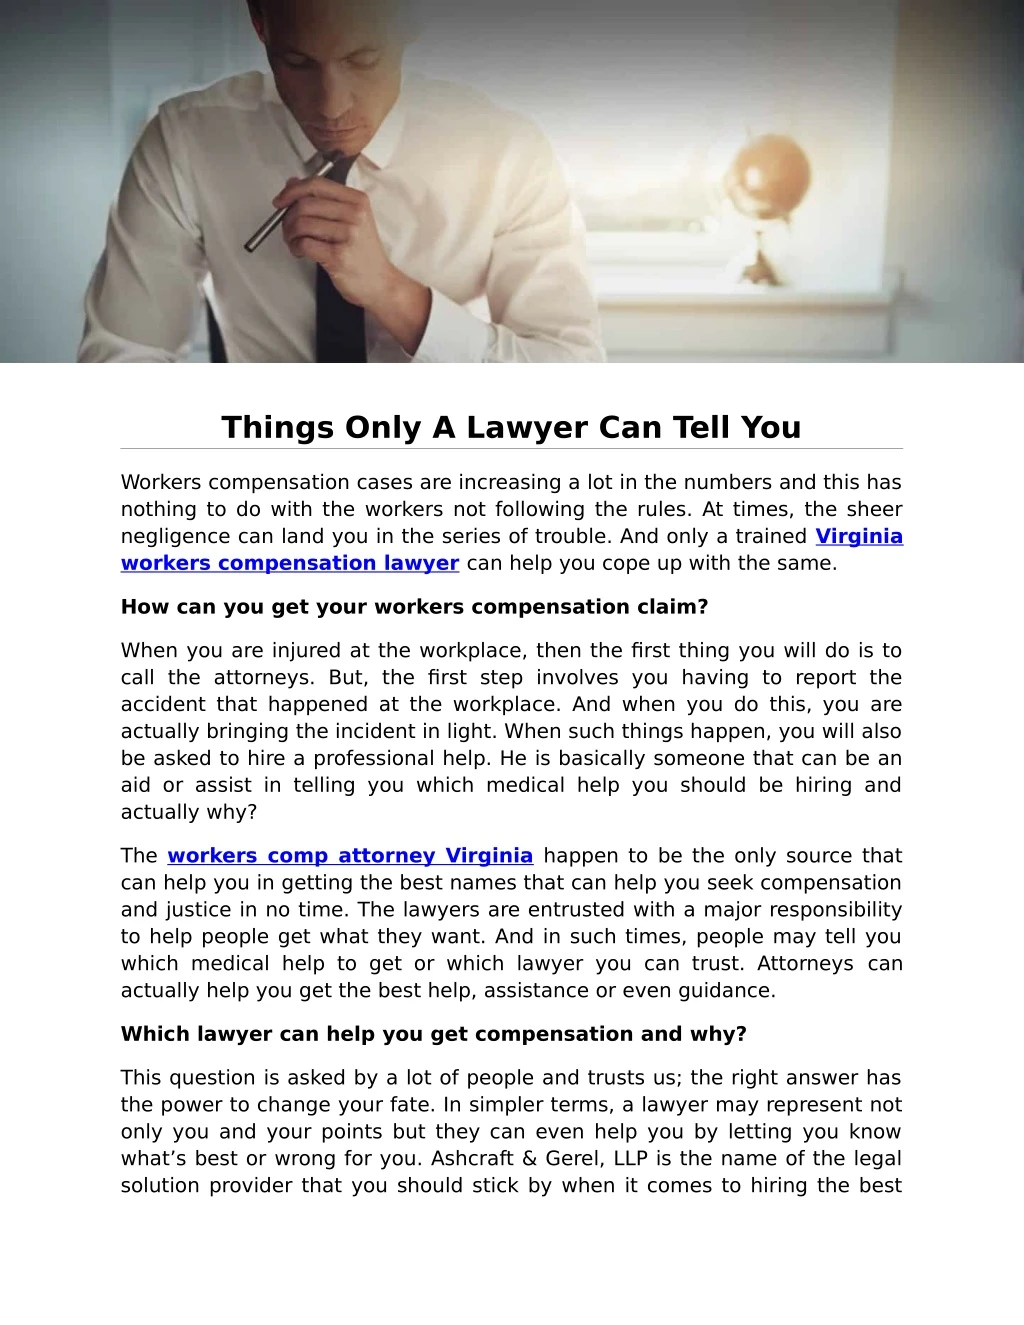 things only a lawyer can tell you